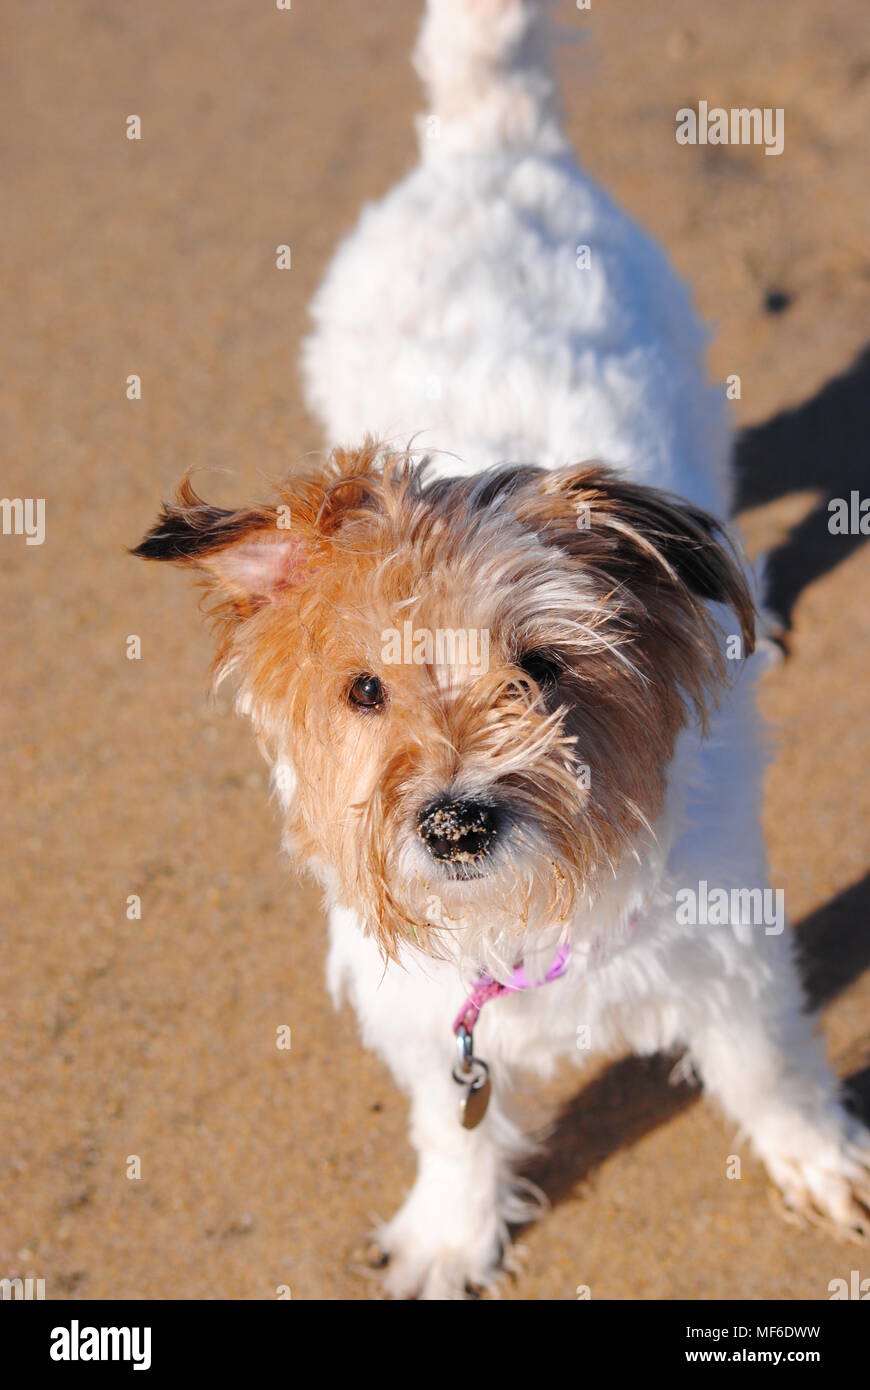 A little white and brown terrier dog with a sandy nose and a pink collar enjoying her walk on a golden sand Cornish beach in the sunshine Stock Photo